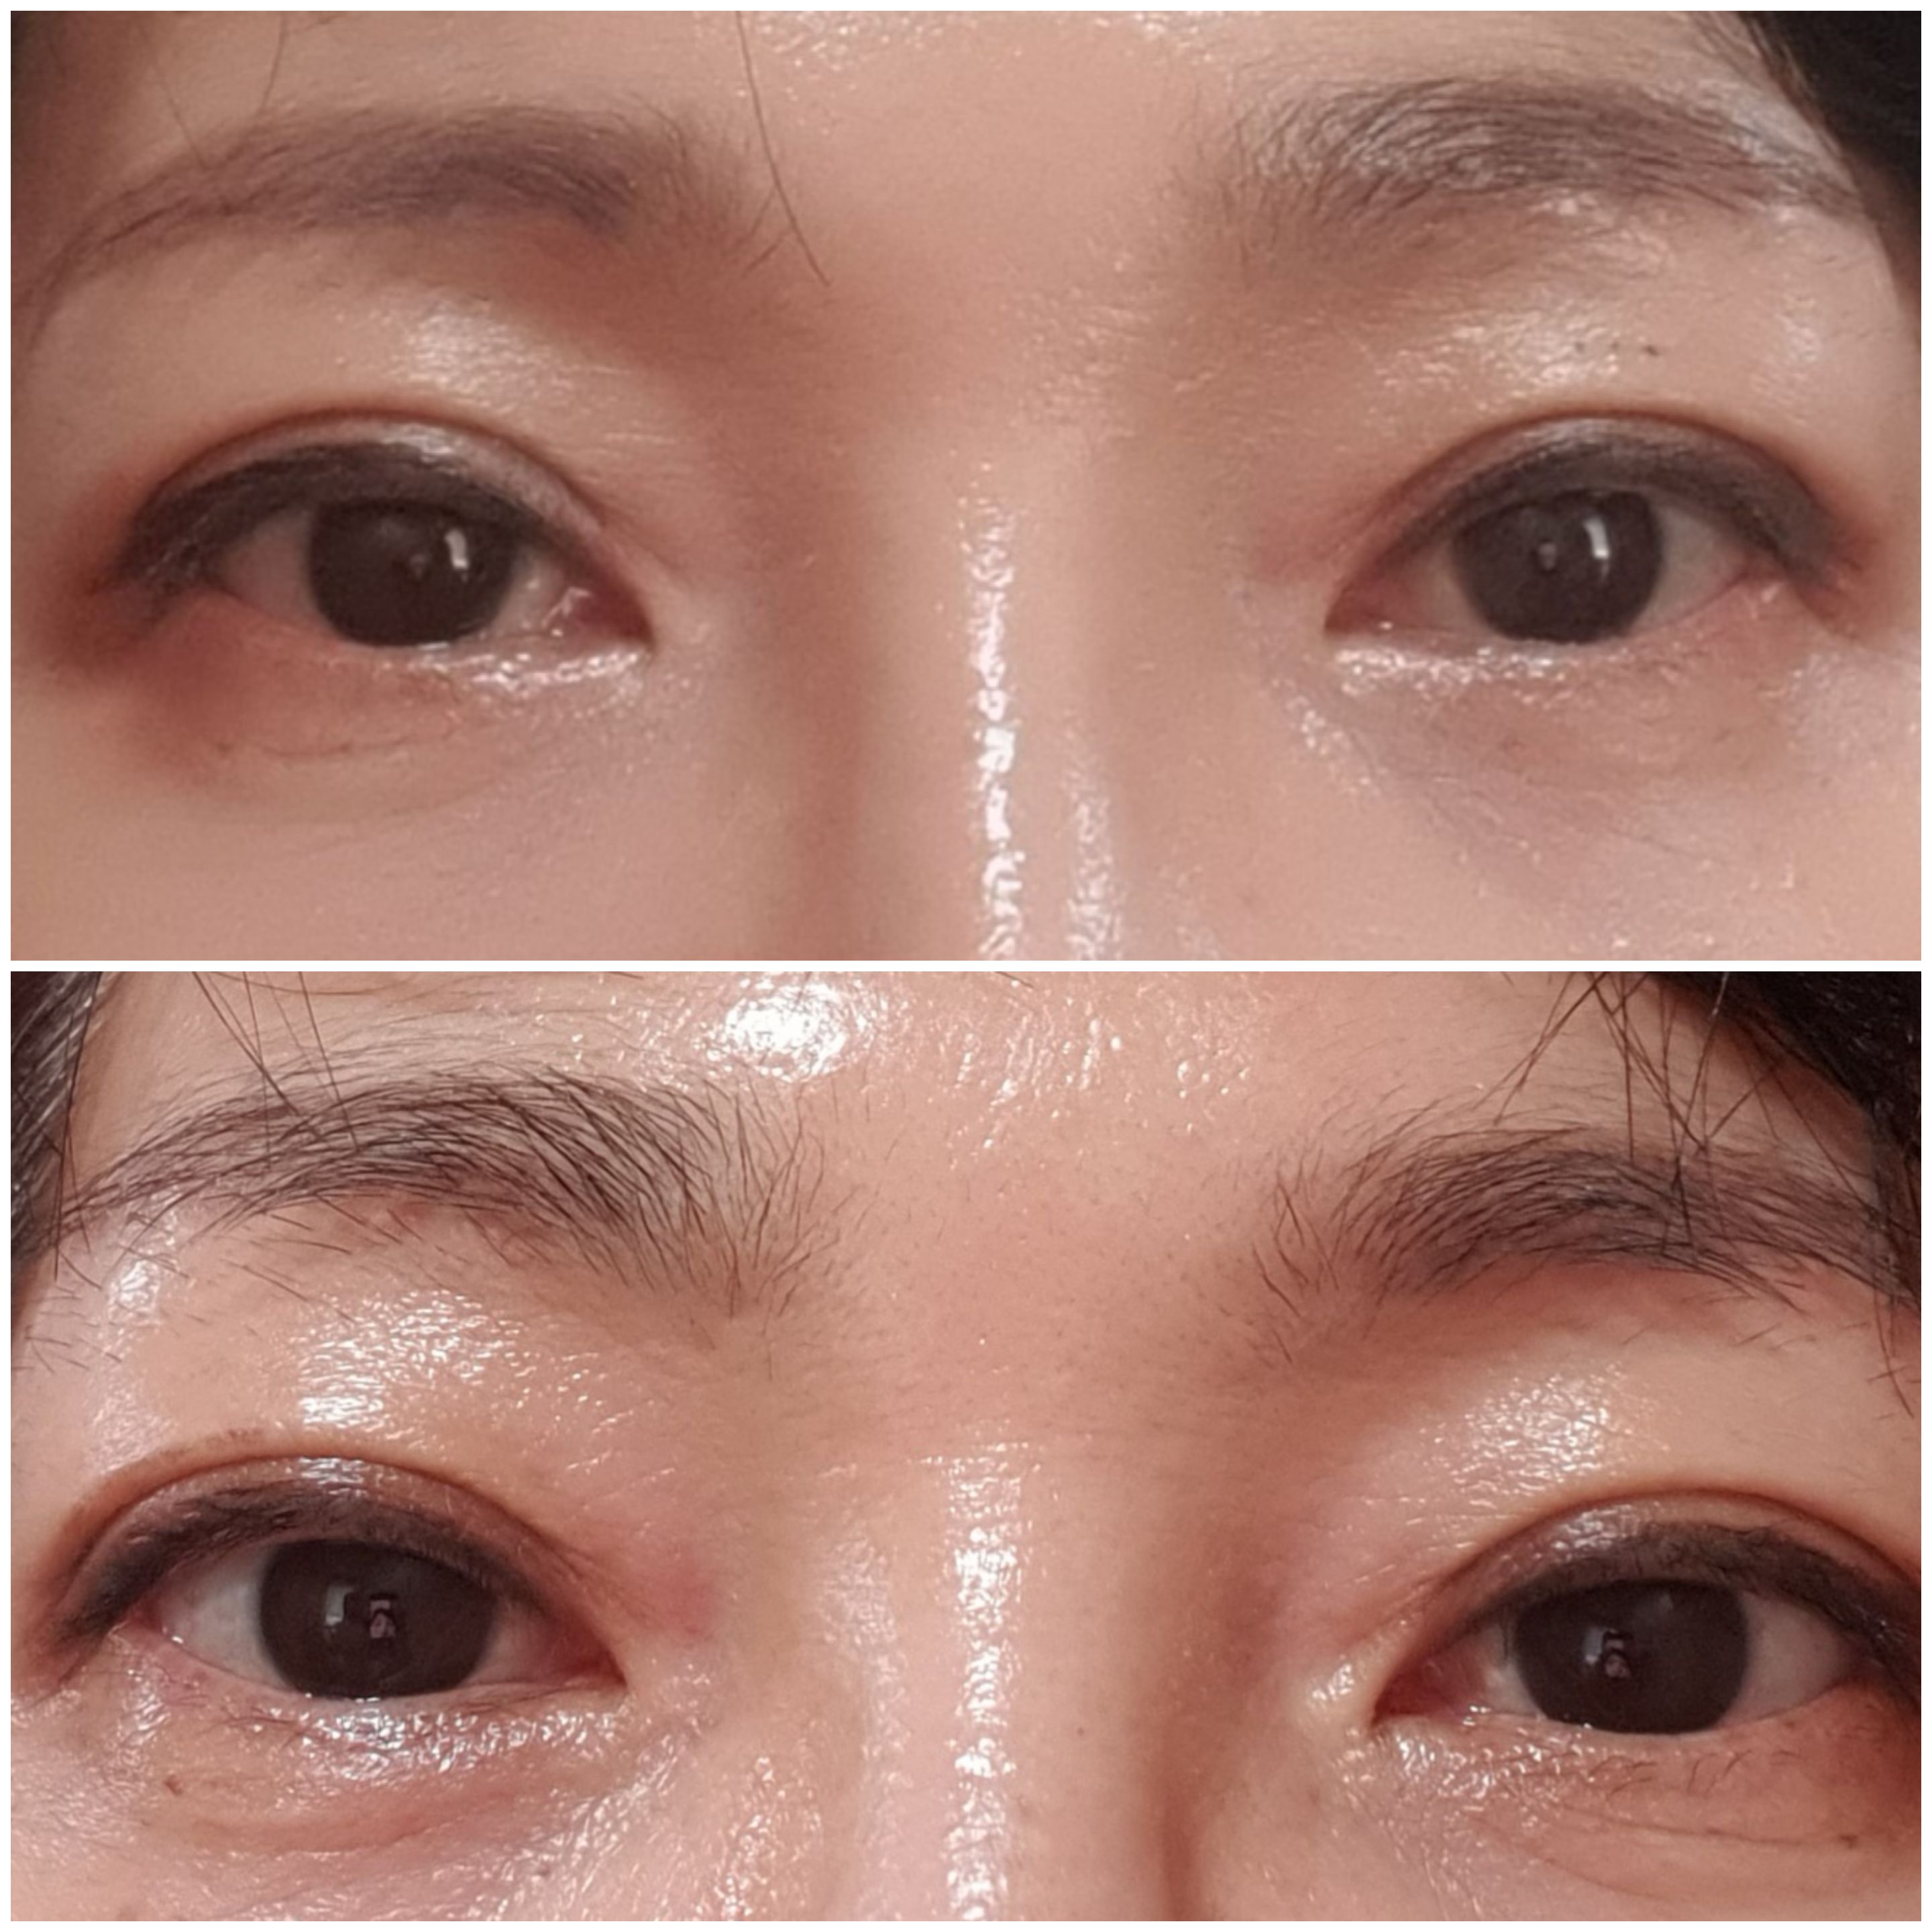 Double eyelid sagging surgery